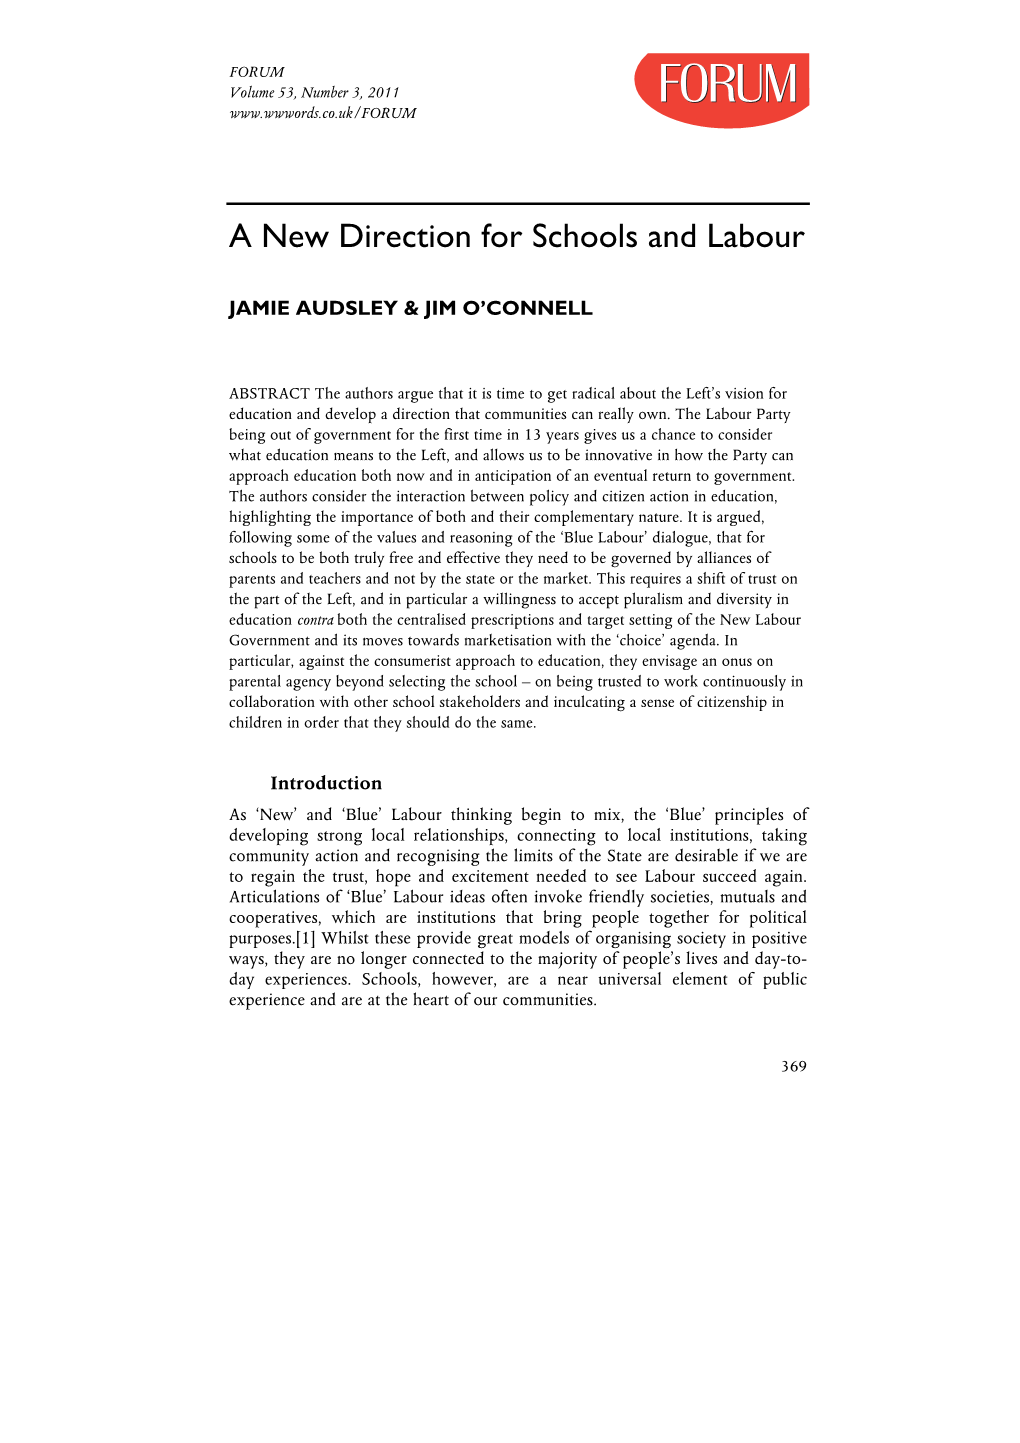 A New Direction for Schools and Labour